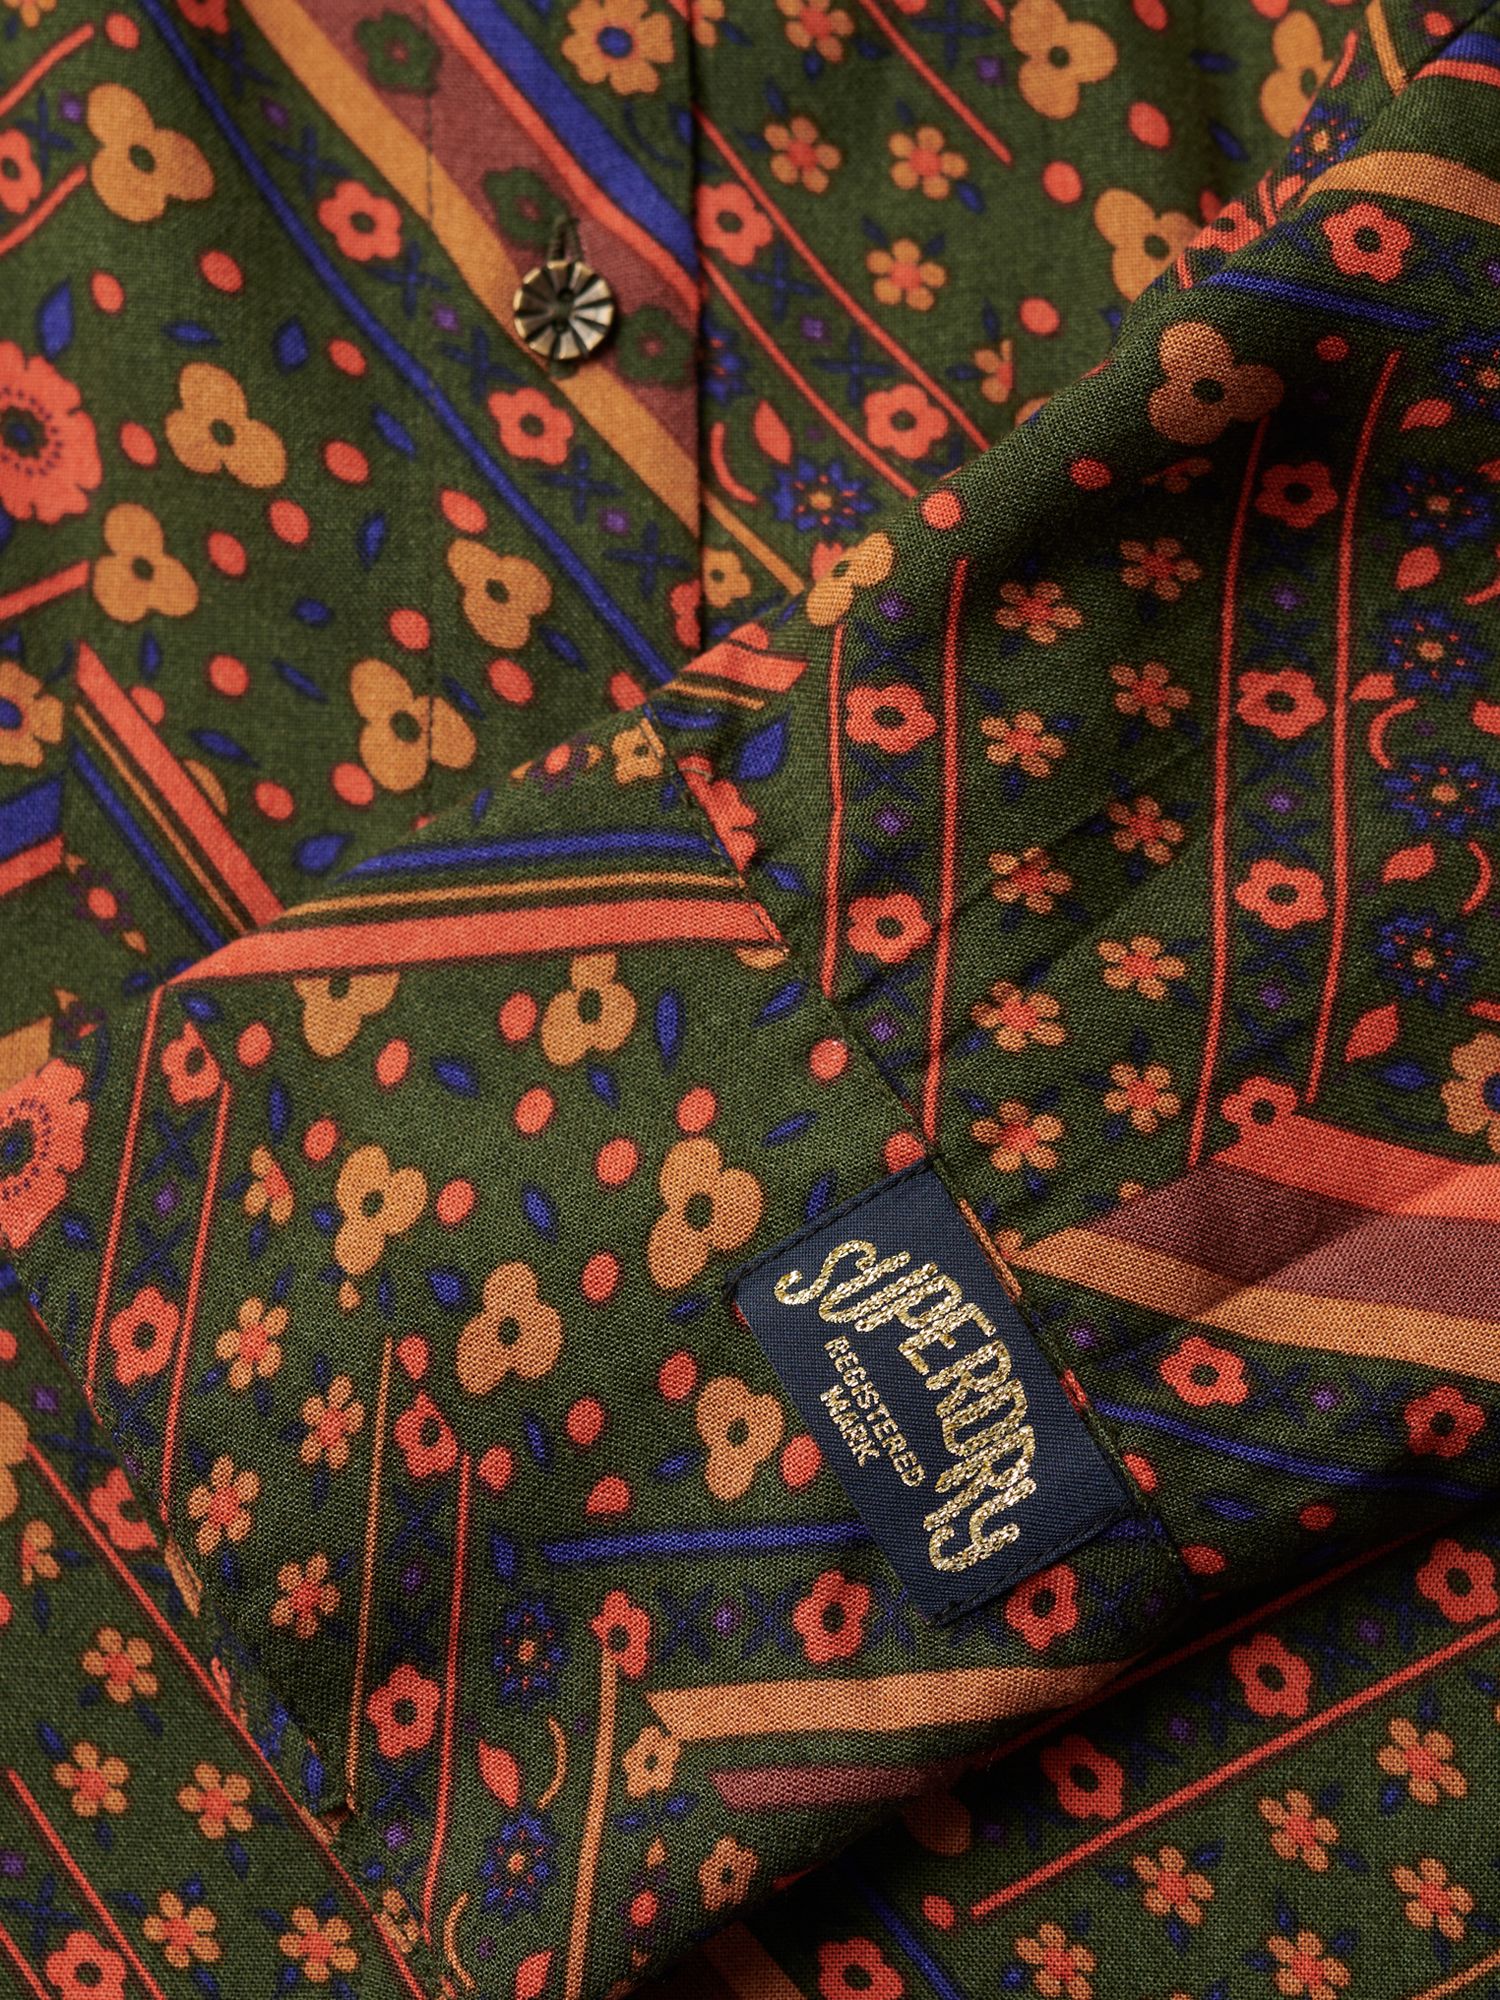 Buy Superdry Abstract Chevron 70s Print Slim Fit Shirt, Multi Online at johnlewis.com